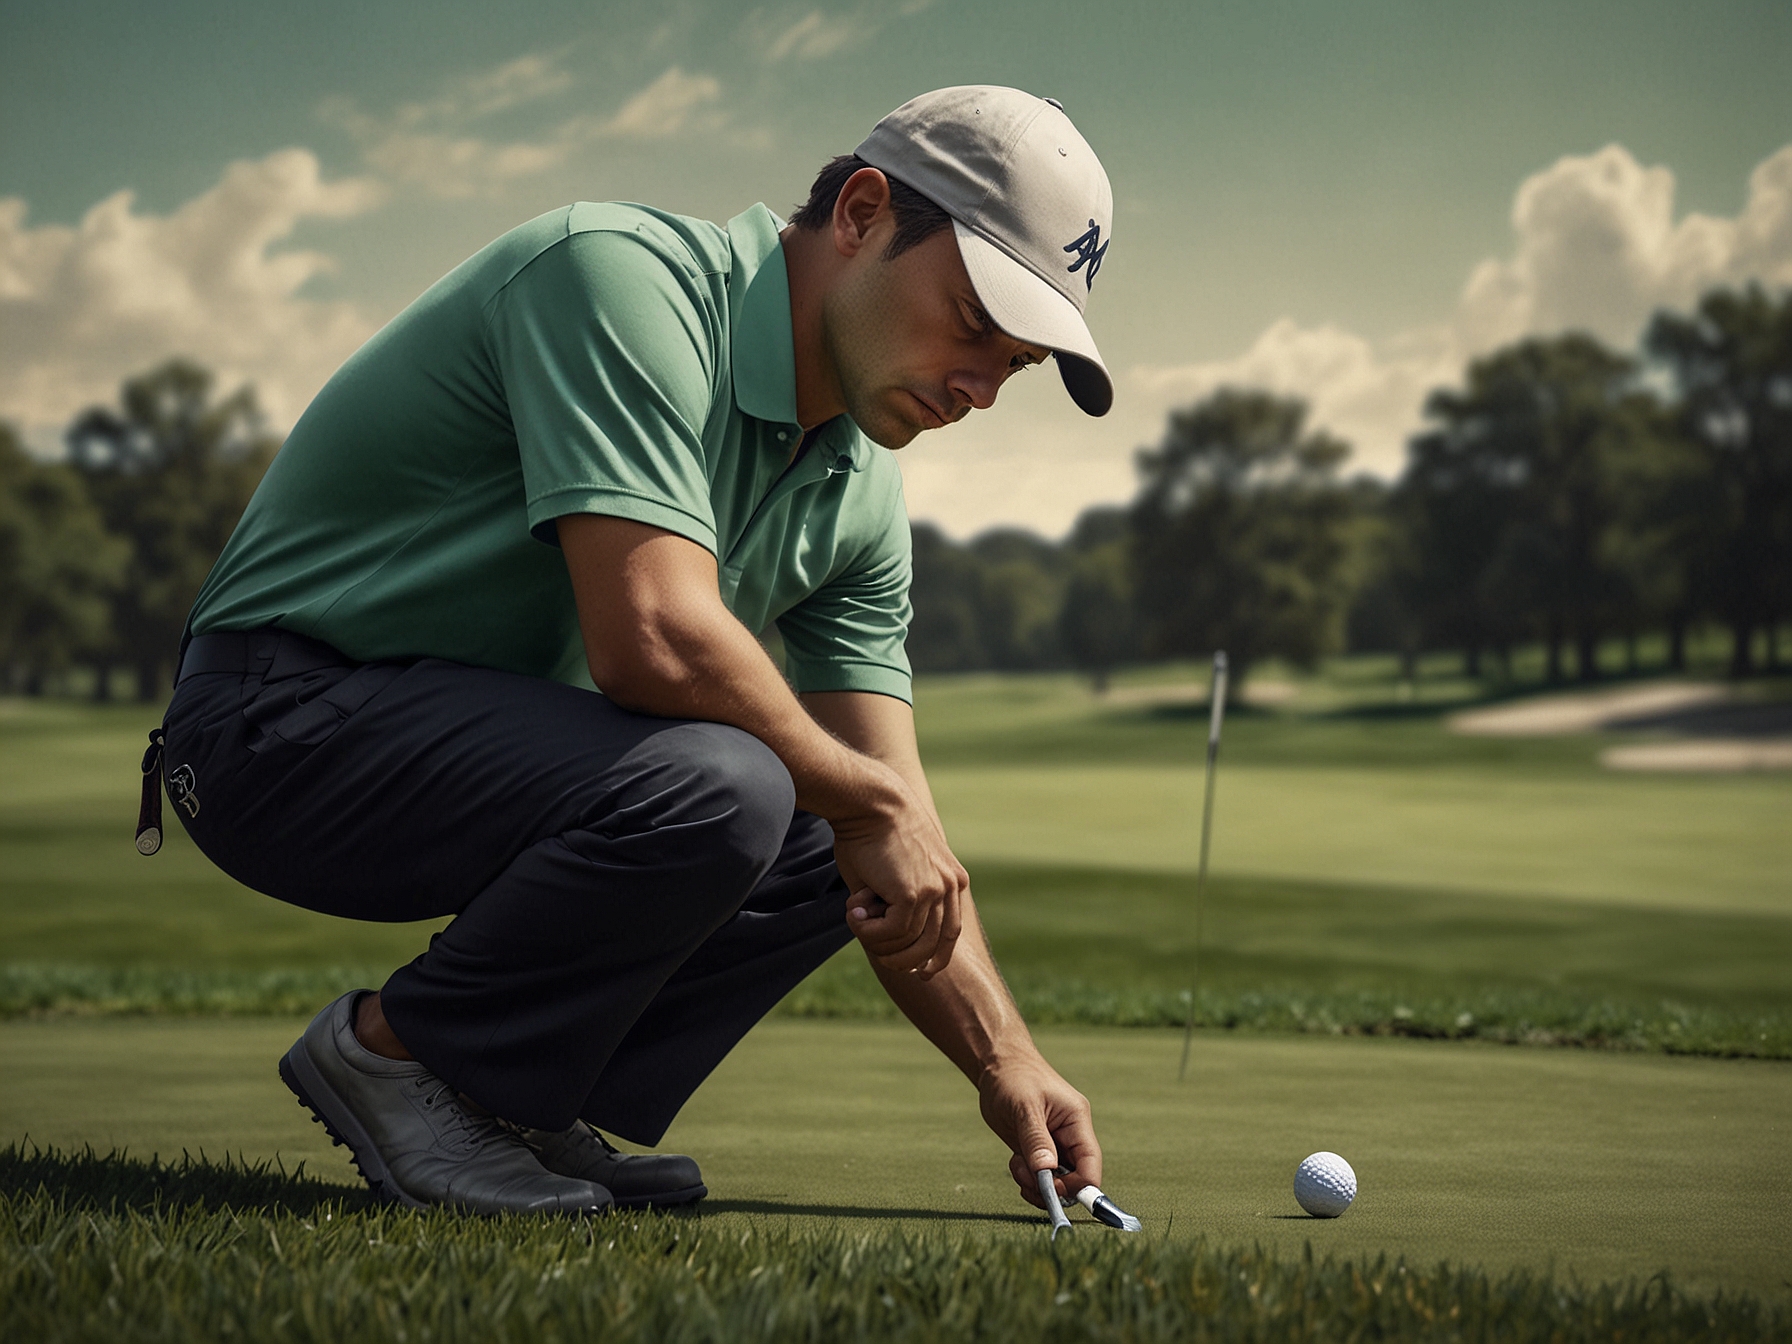 Vital in a focused stance, putting on a challenging green during a competitive golf match, showcasing his calm demeanor and strategic gameplay essential for the Michigan qualifier.